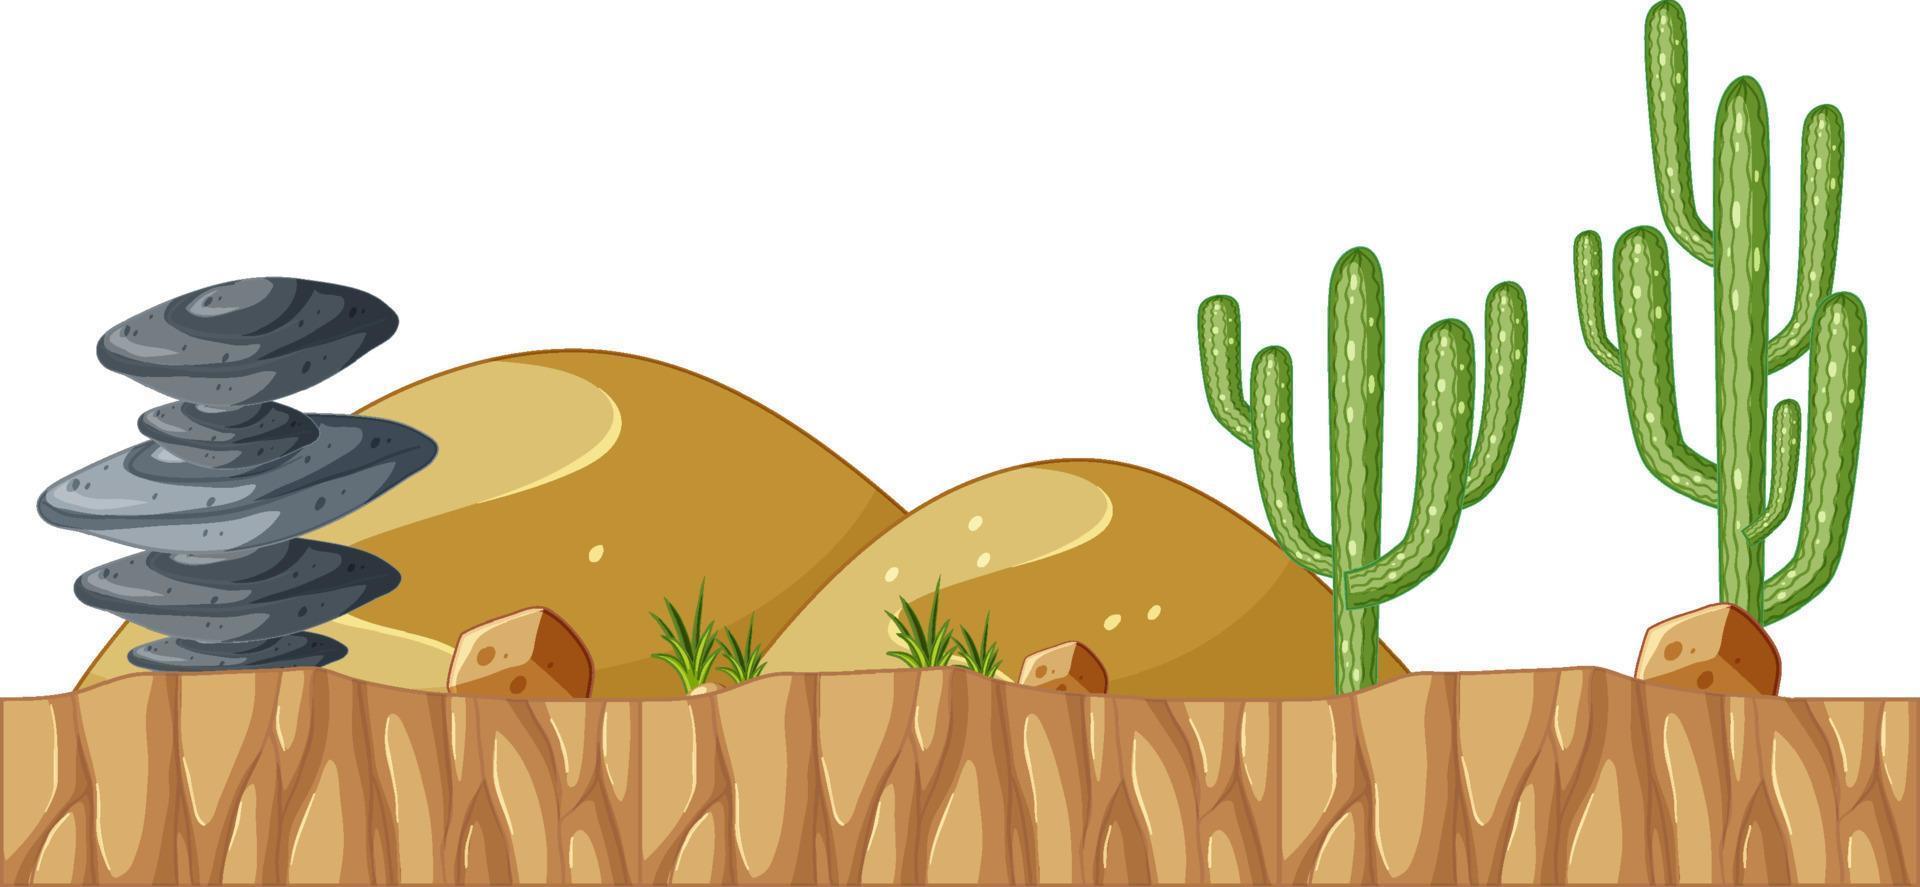 Saguaro cactus and stone on the ground vector